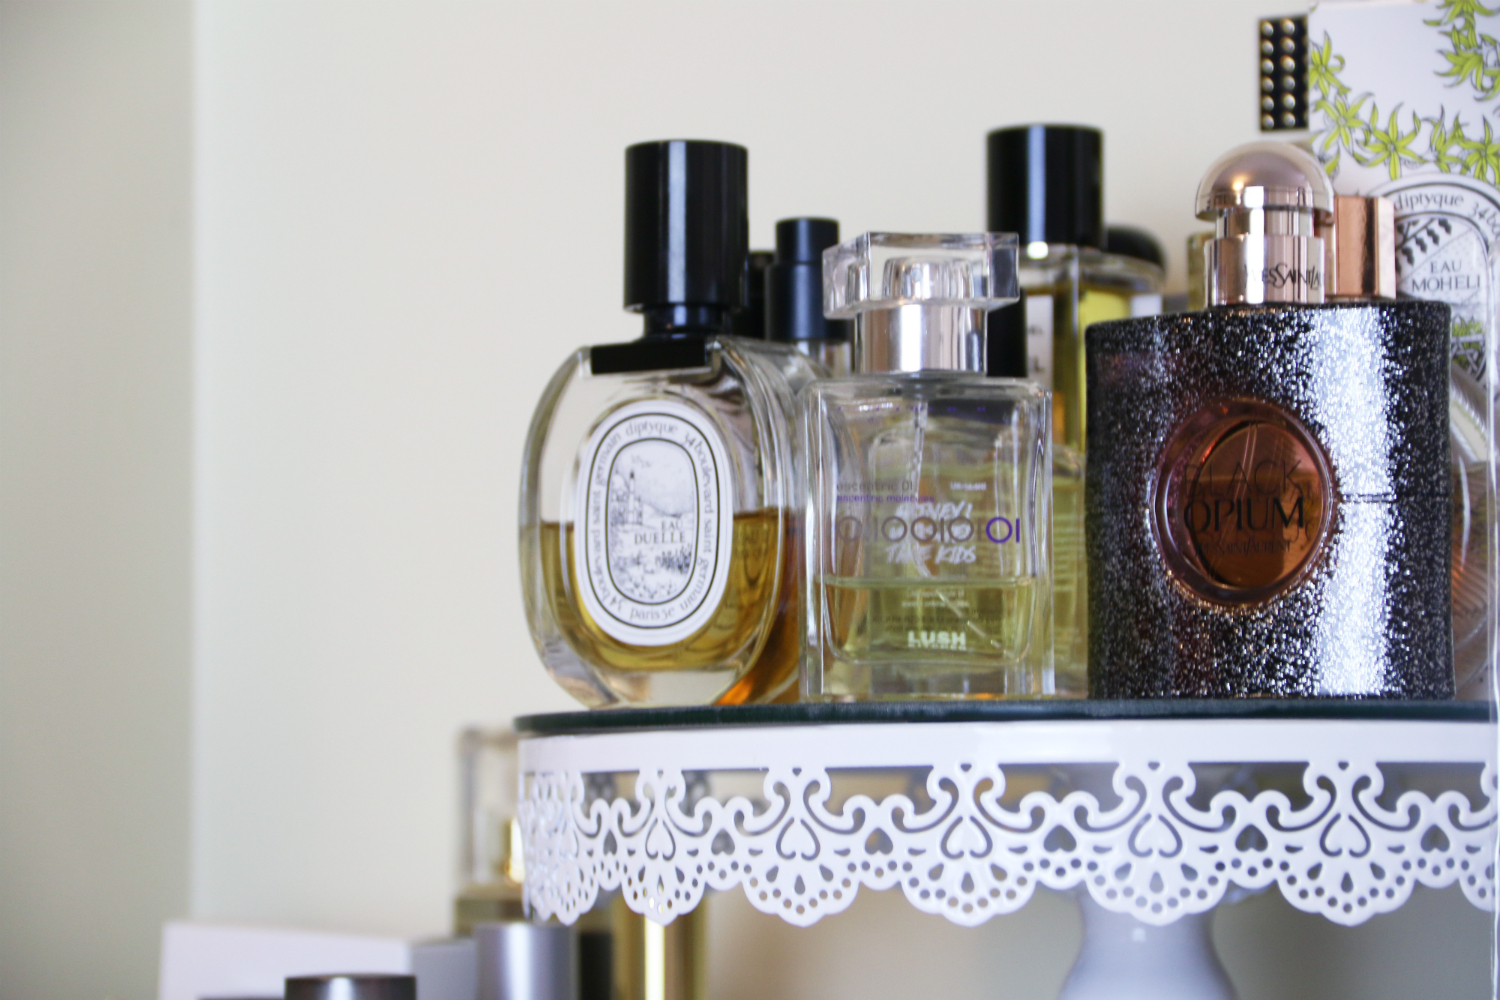 COLLECTION: Storing Perfumes